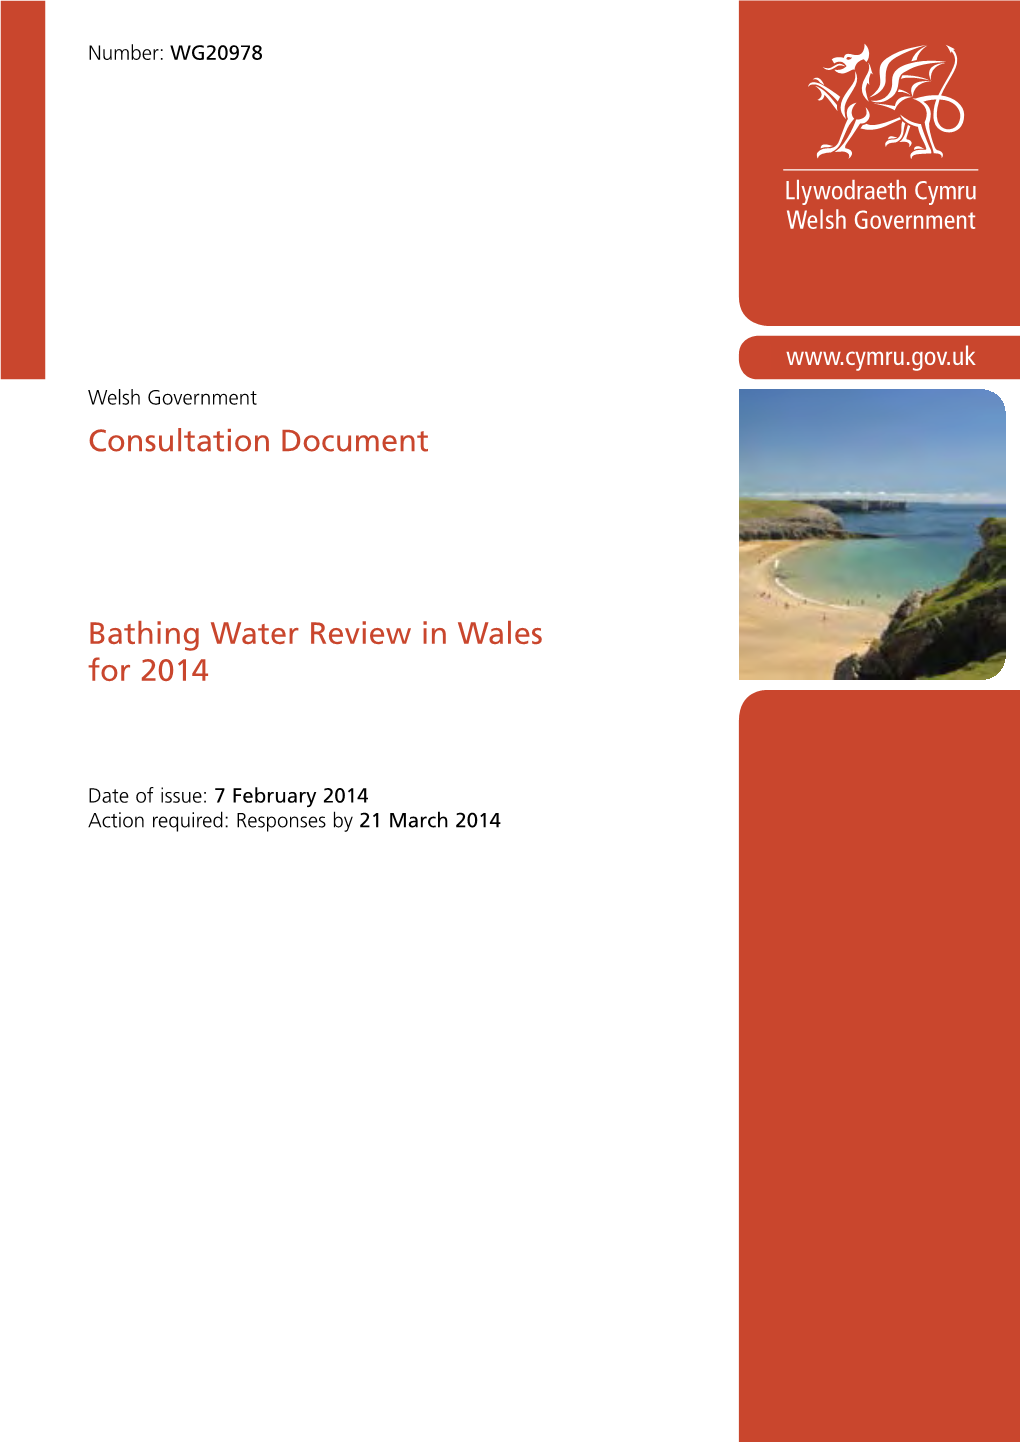 Bathing Water Review in Wales for 2014: Consultation Document